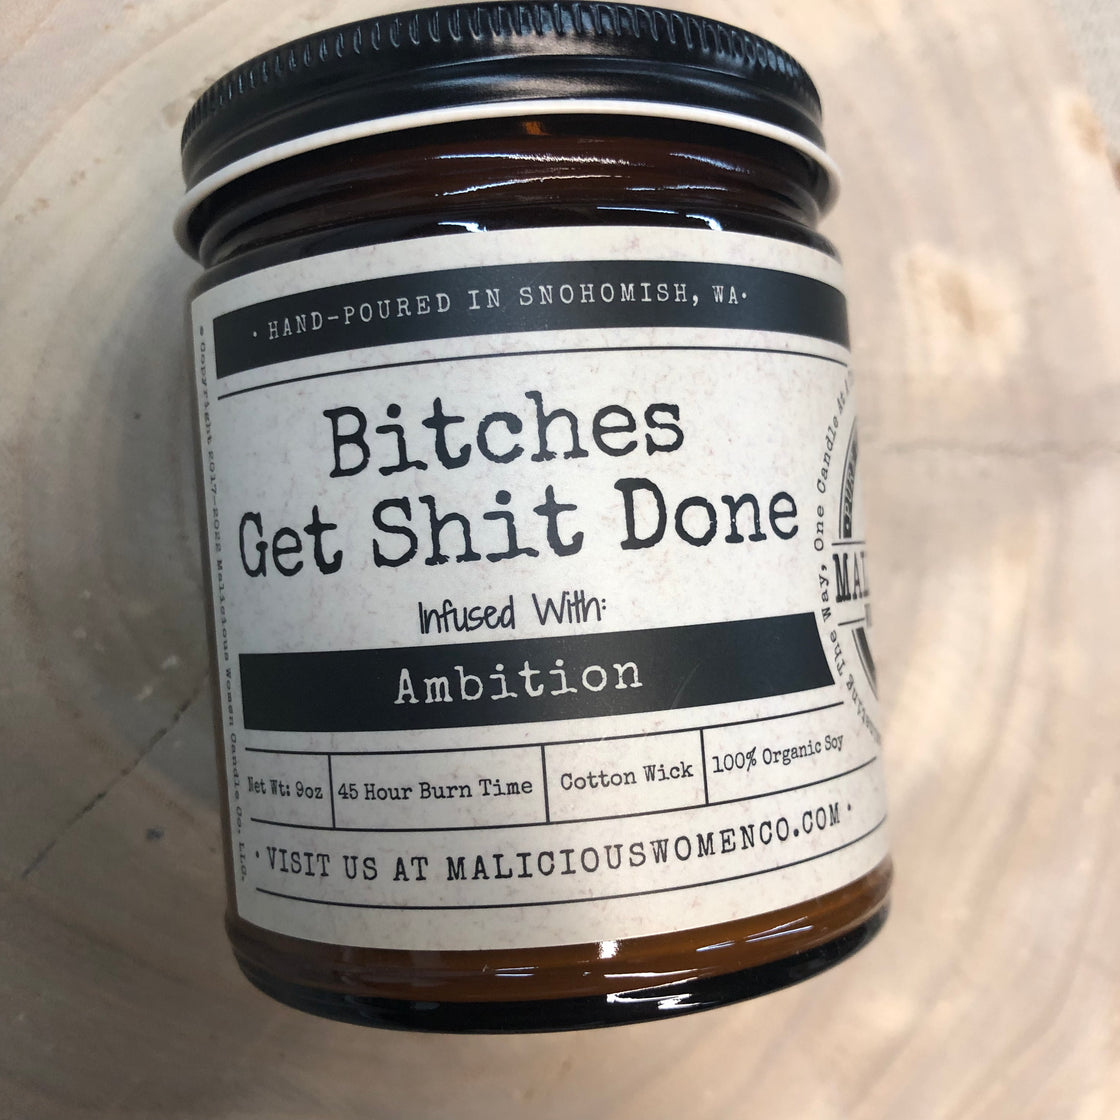 Bitches Get Shit Done - Infused with Ambition - Pink Chandelier